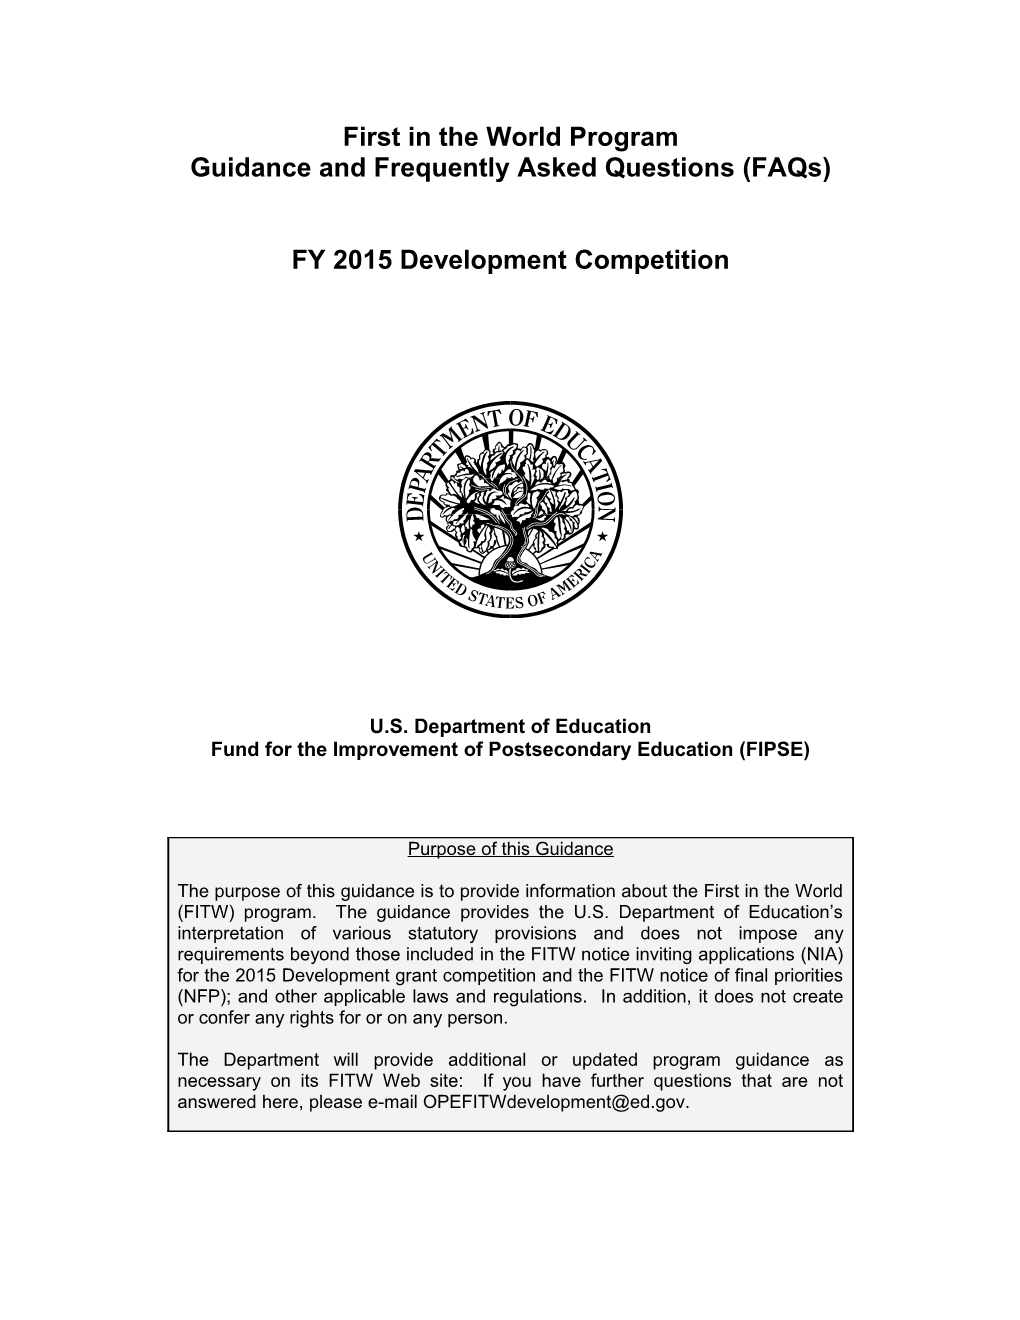 First in the World Program Guidance and Frequently Asked Questions (Faqs) FY 2015 Development